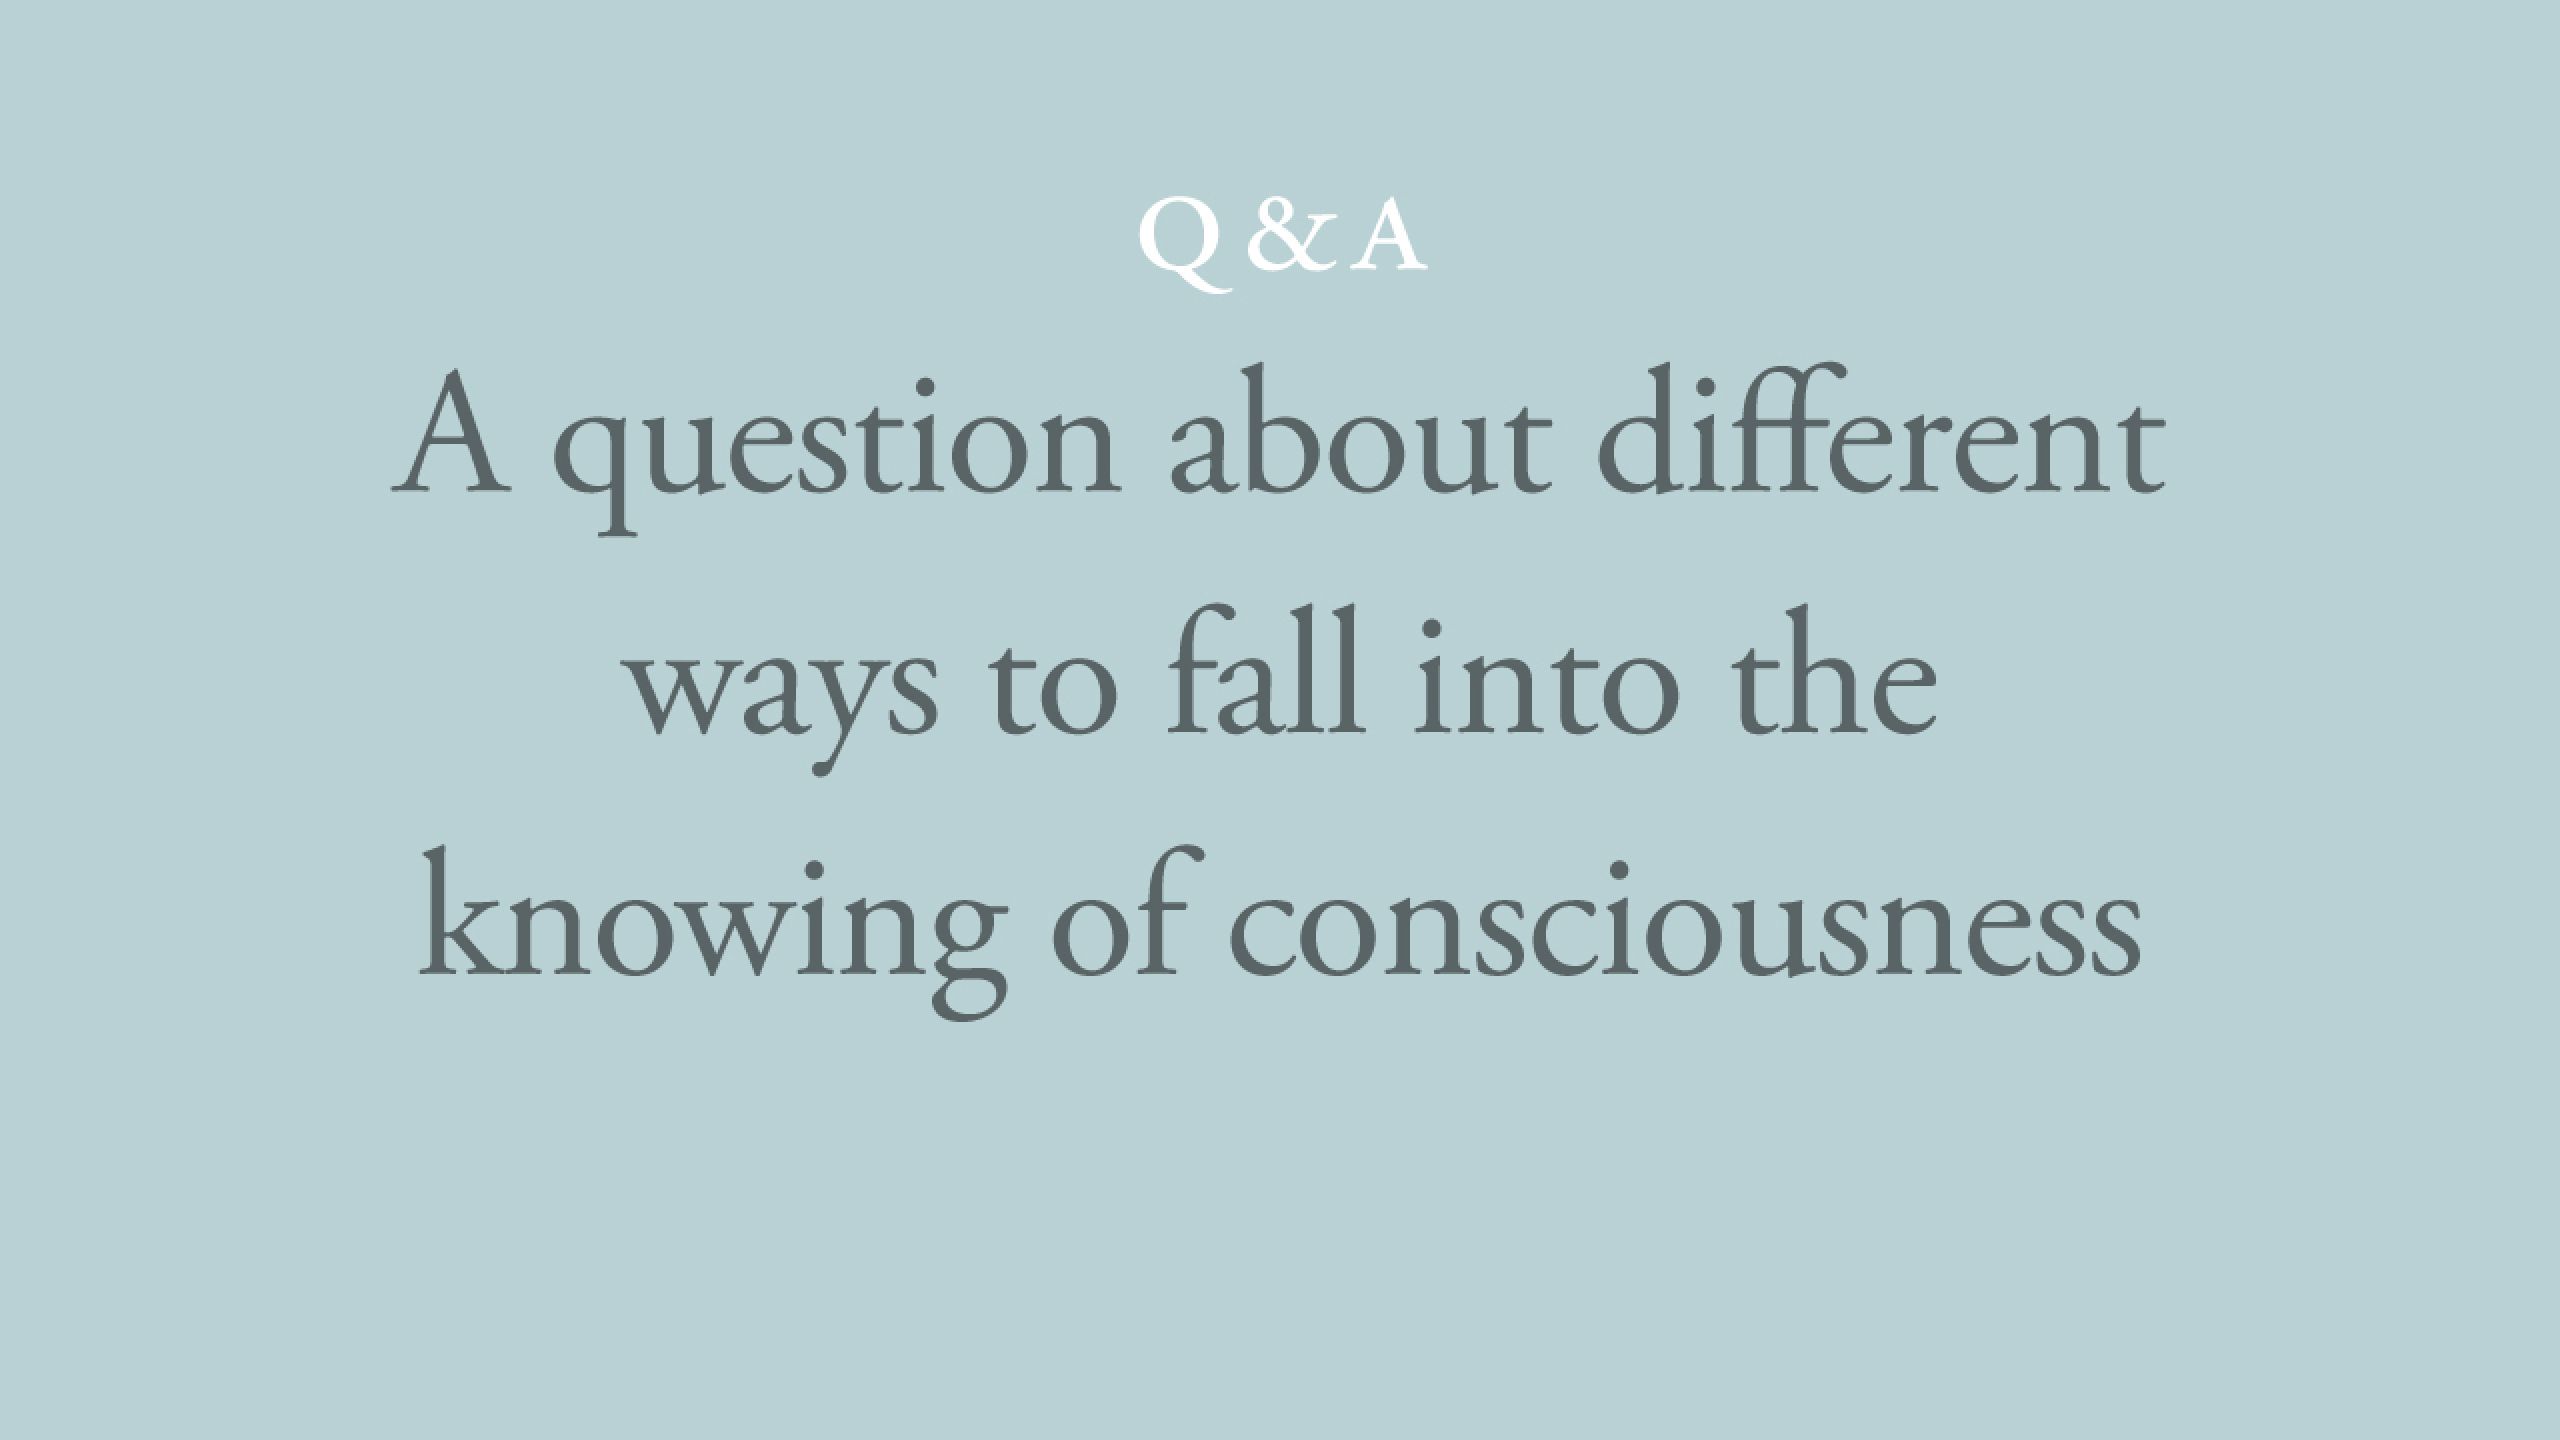 Why are there many ways to fall into the knowing of consciousness?